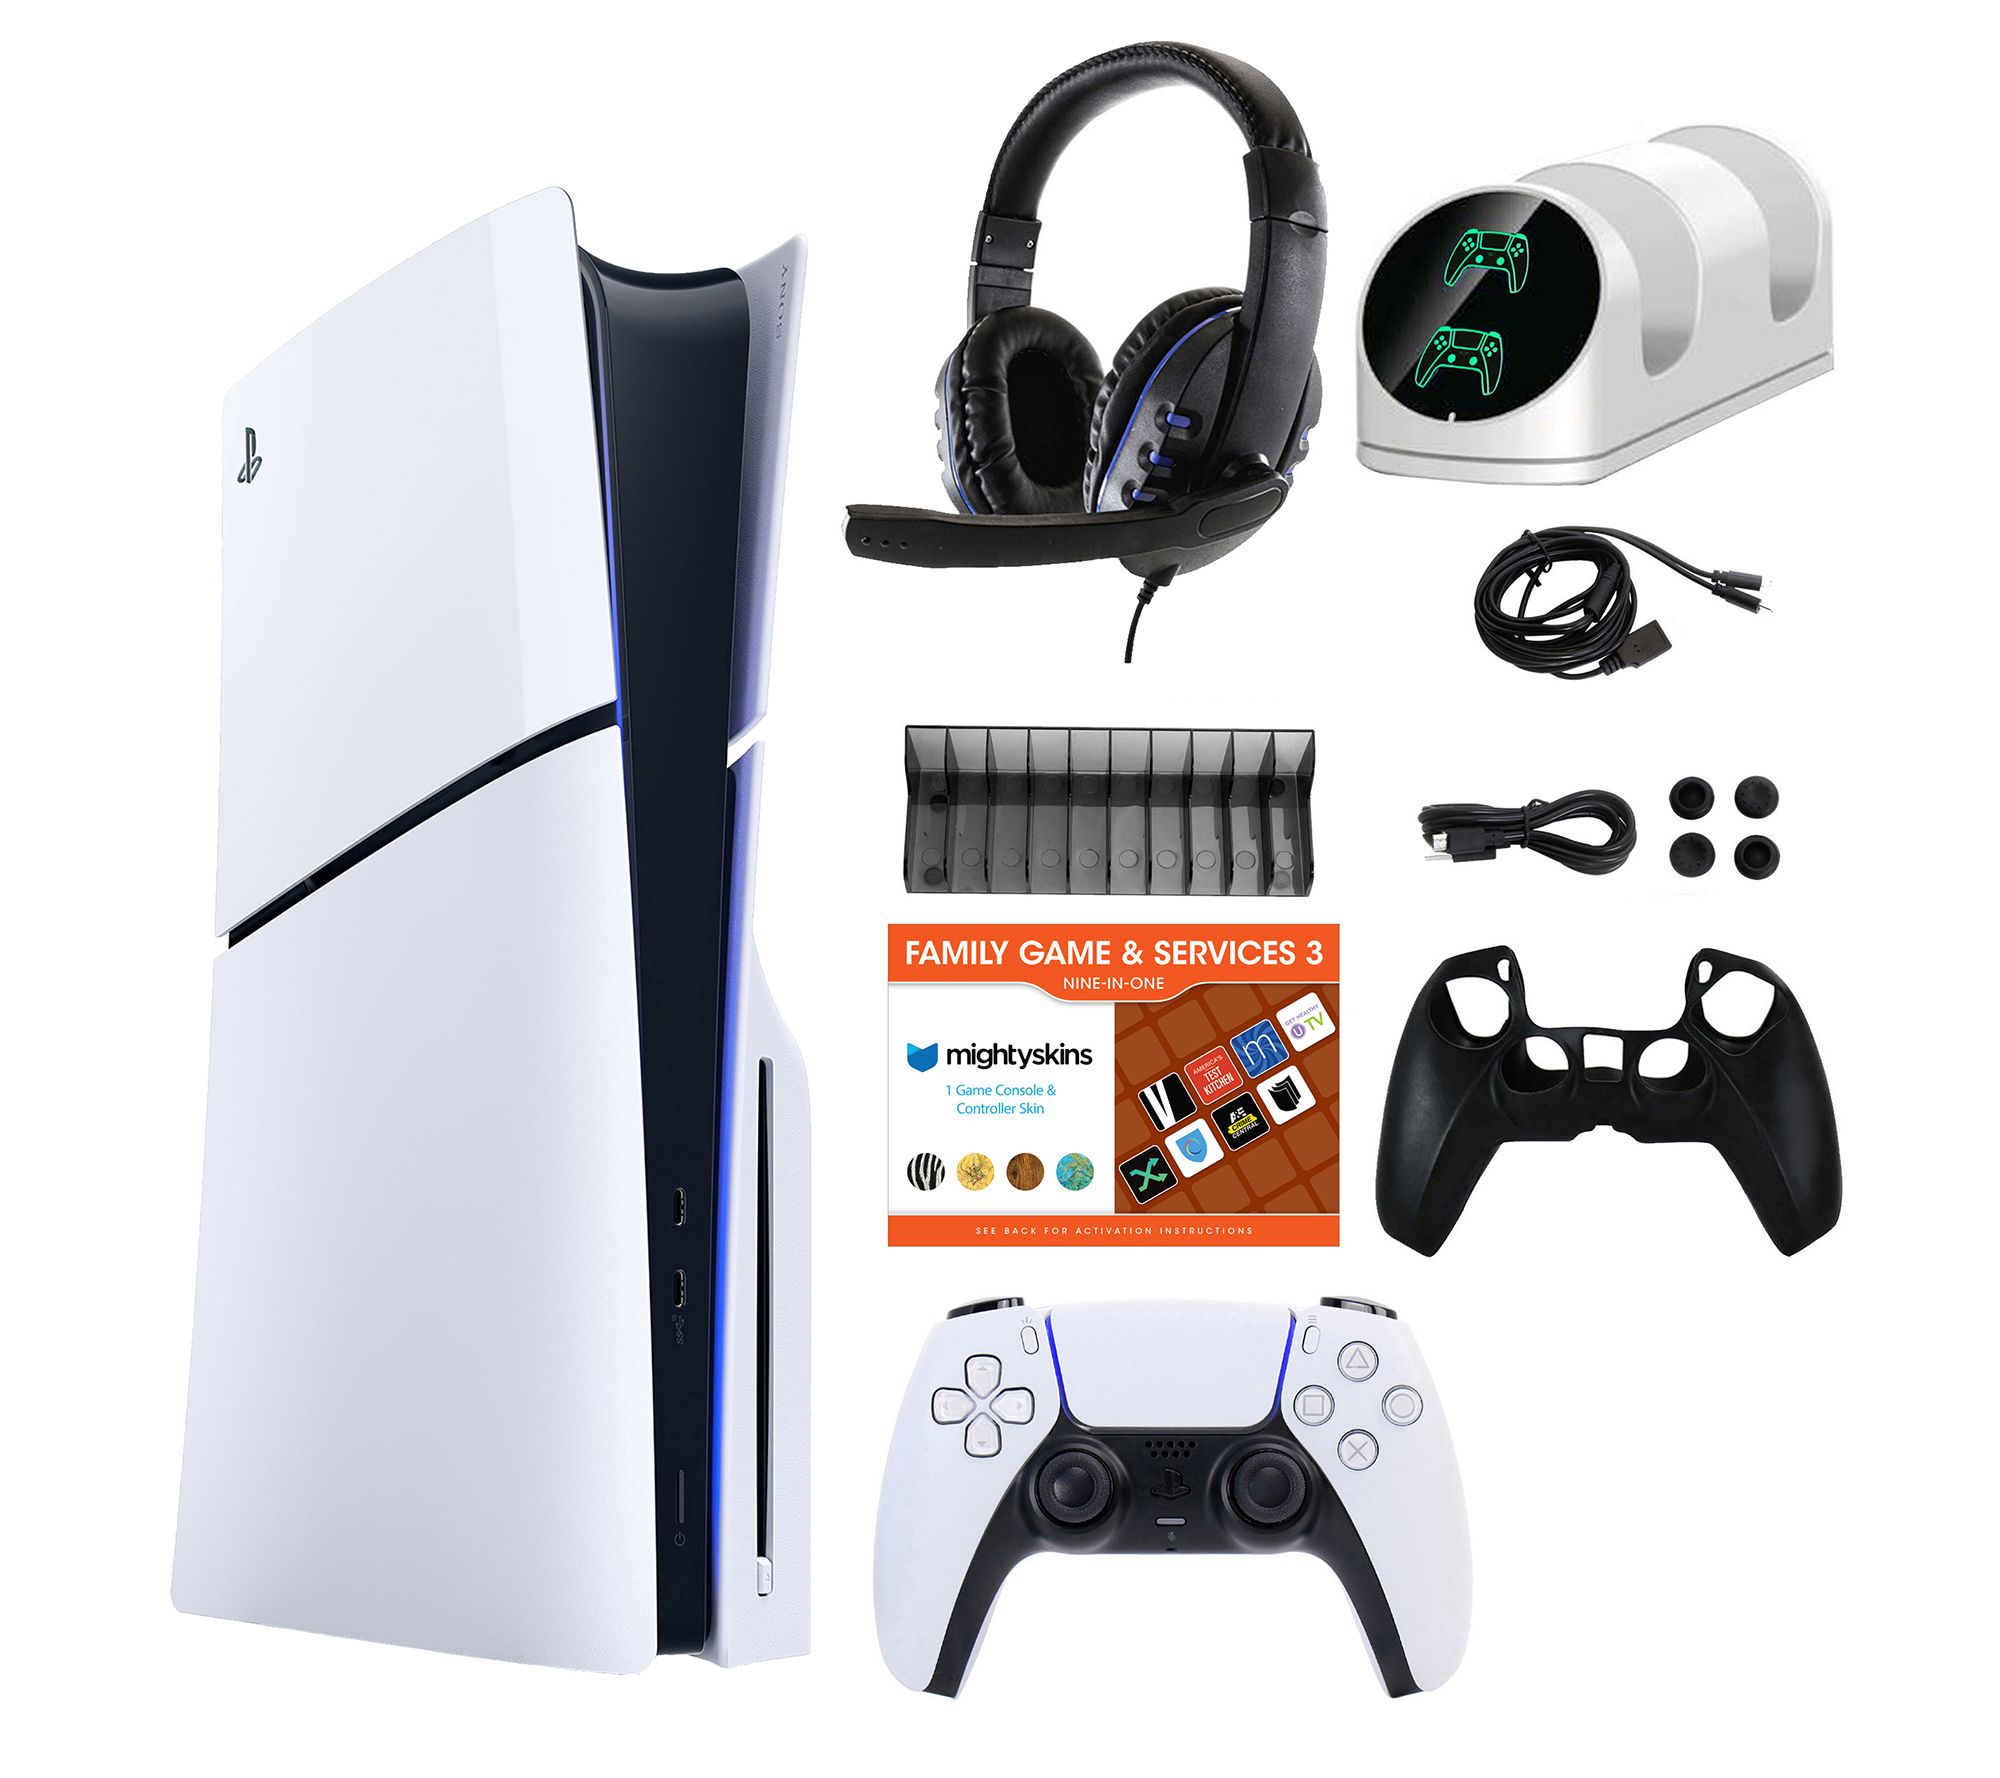 PS5 Slim Disc Console with Accessories Bundle 